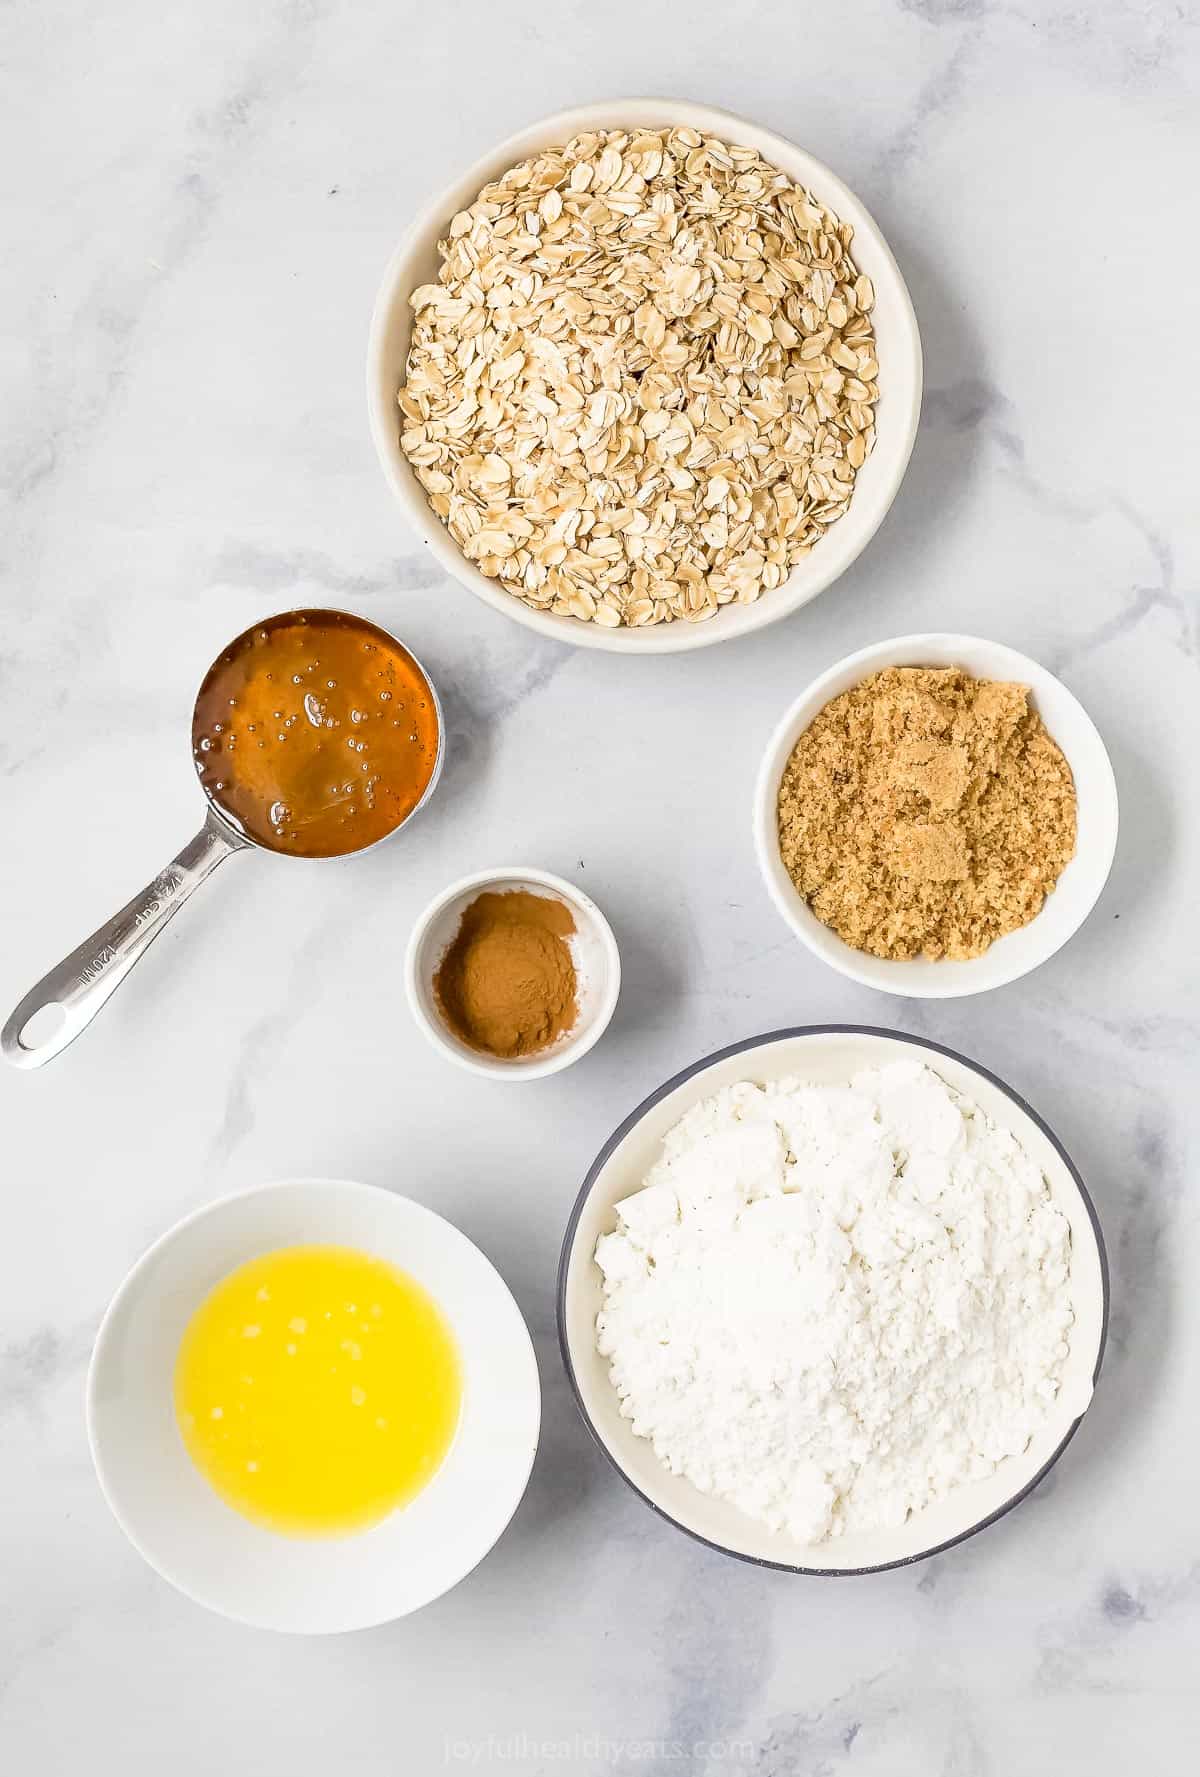 A bowl of rolled oats, a small dish containing ground cinnamon and the rest of the bar ingredients on a marble countertop